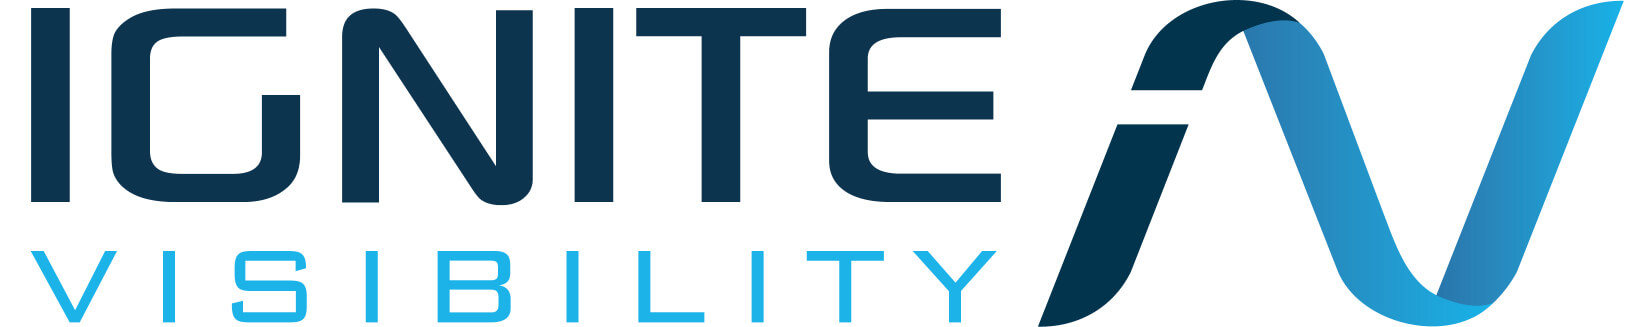  Top Online Marketing Agency Logo: Ignite Visibility